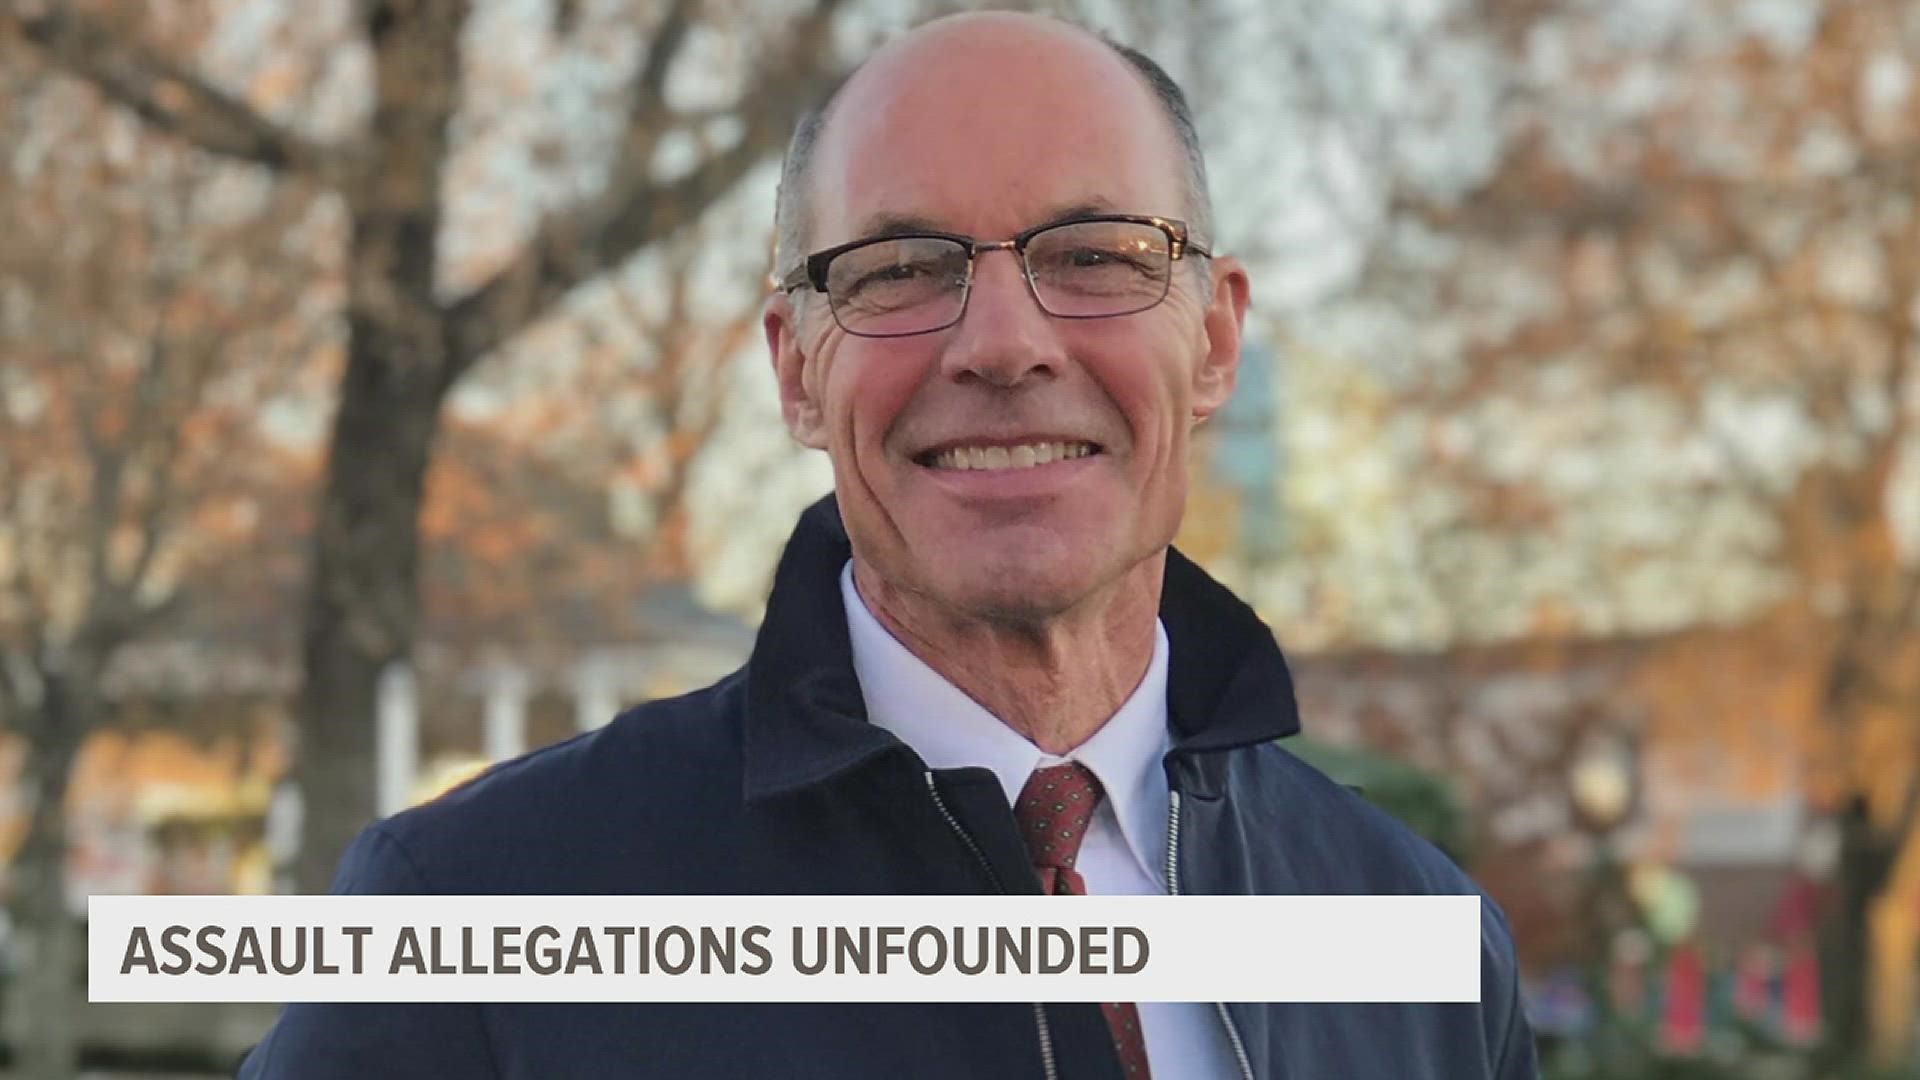 The Des Moines Police Department said there was not enough evidence to back the allegations against the candidate, who is running against Iowa Sen. Chuck Grassley.